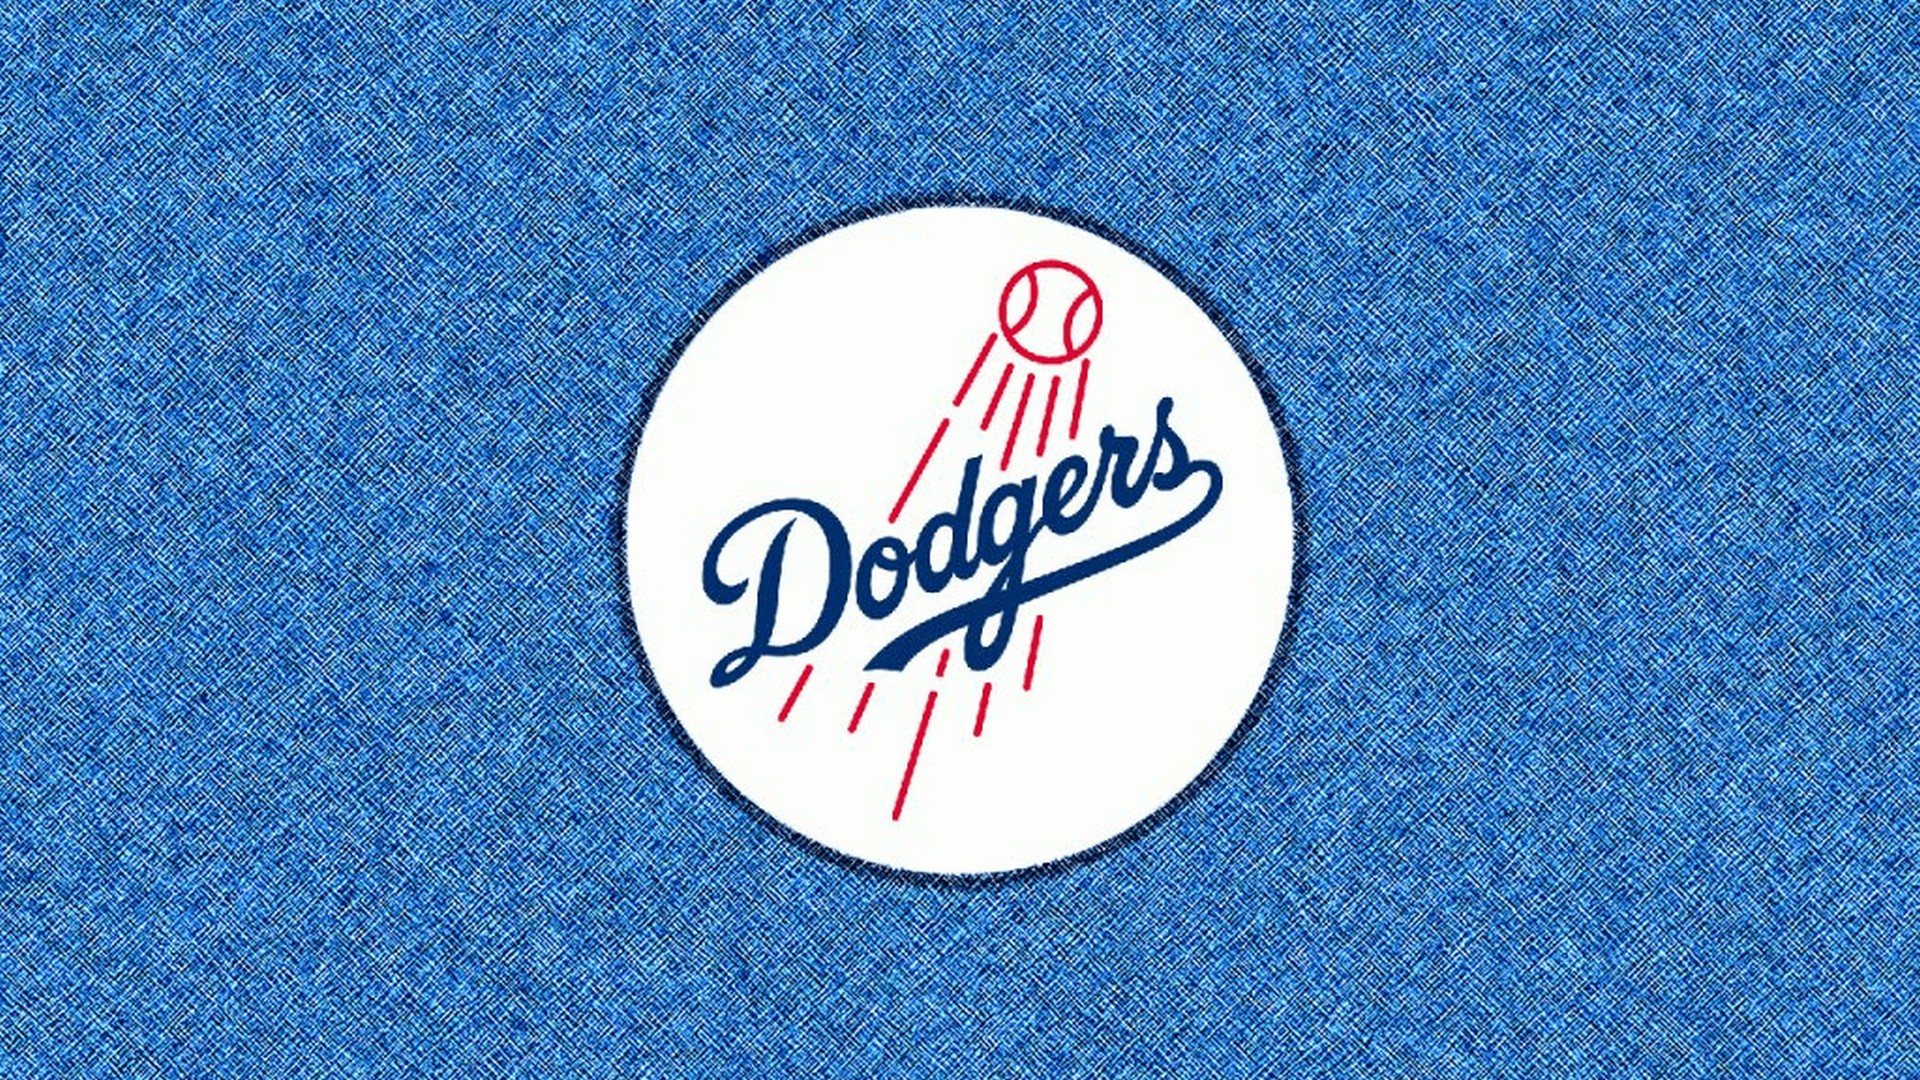 Los Angeles Dodgers Laptop Wallpaper With high-resolution 1920X1080 pixel. You can use this wallpaper for Mac Desktop Wallpaper, Laptop Screensavers, Android Wallpapers, Tablet or iPhone Home Screen and another mobile phone device